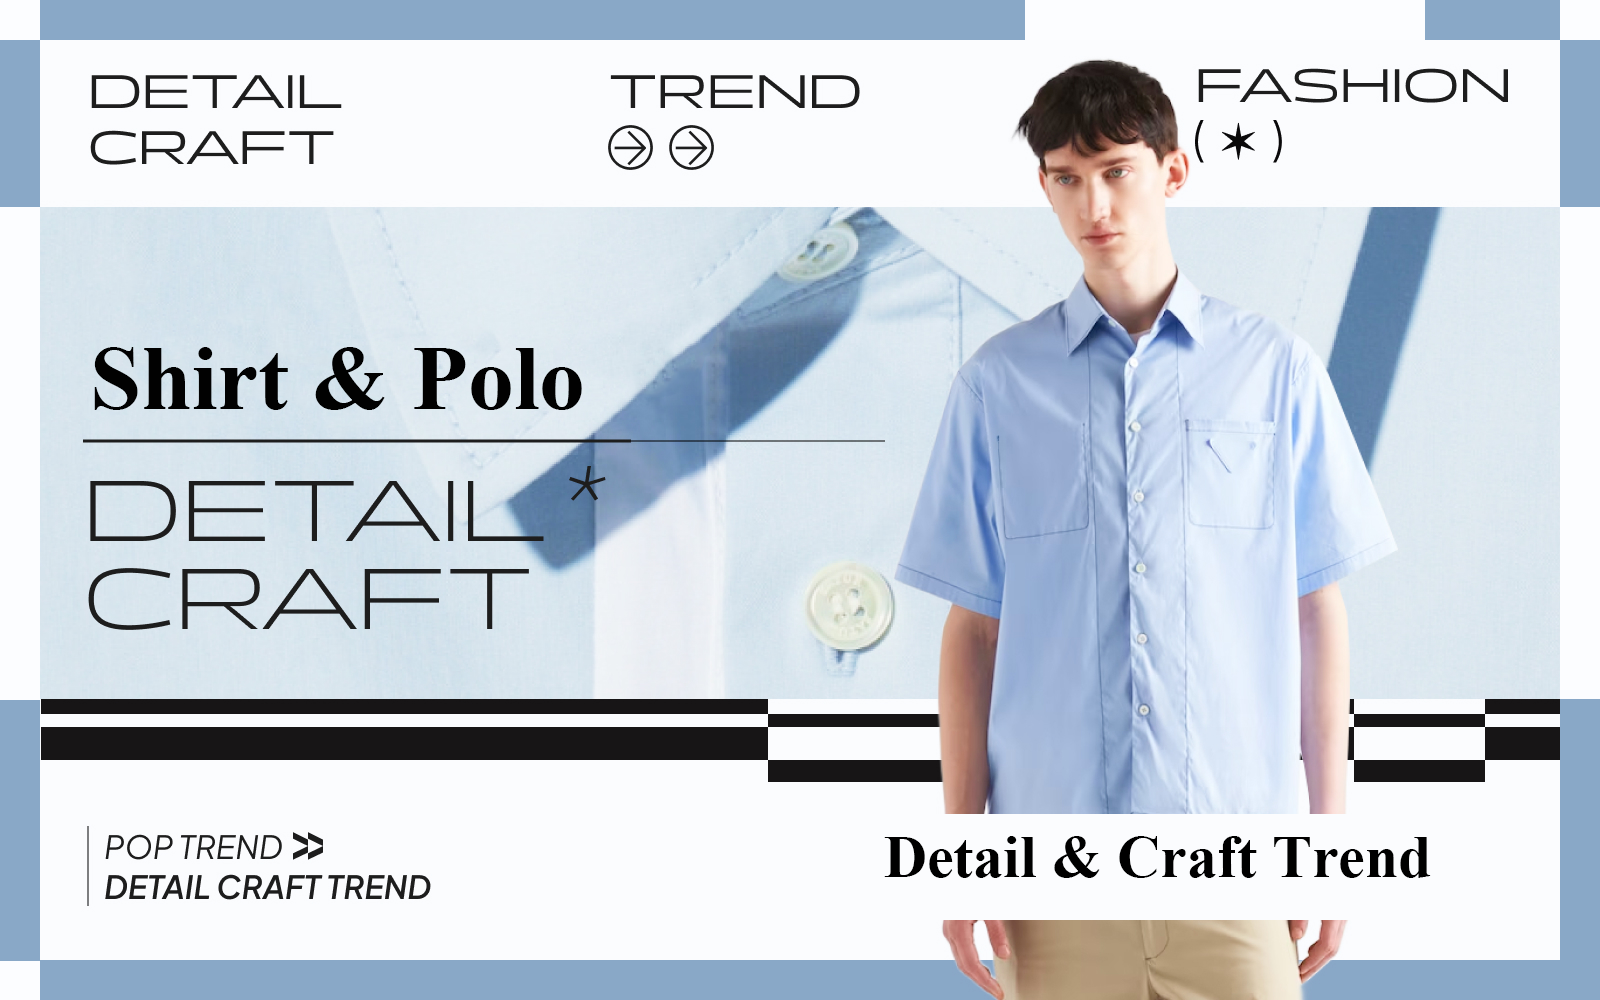 Leisure Innovation -- The Detail & Craft Trend for Men's Shirt & Polo